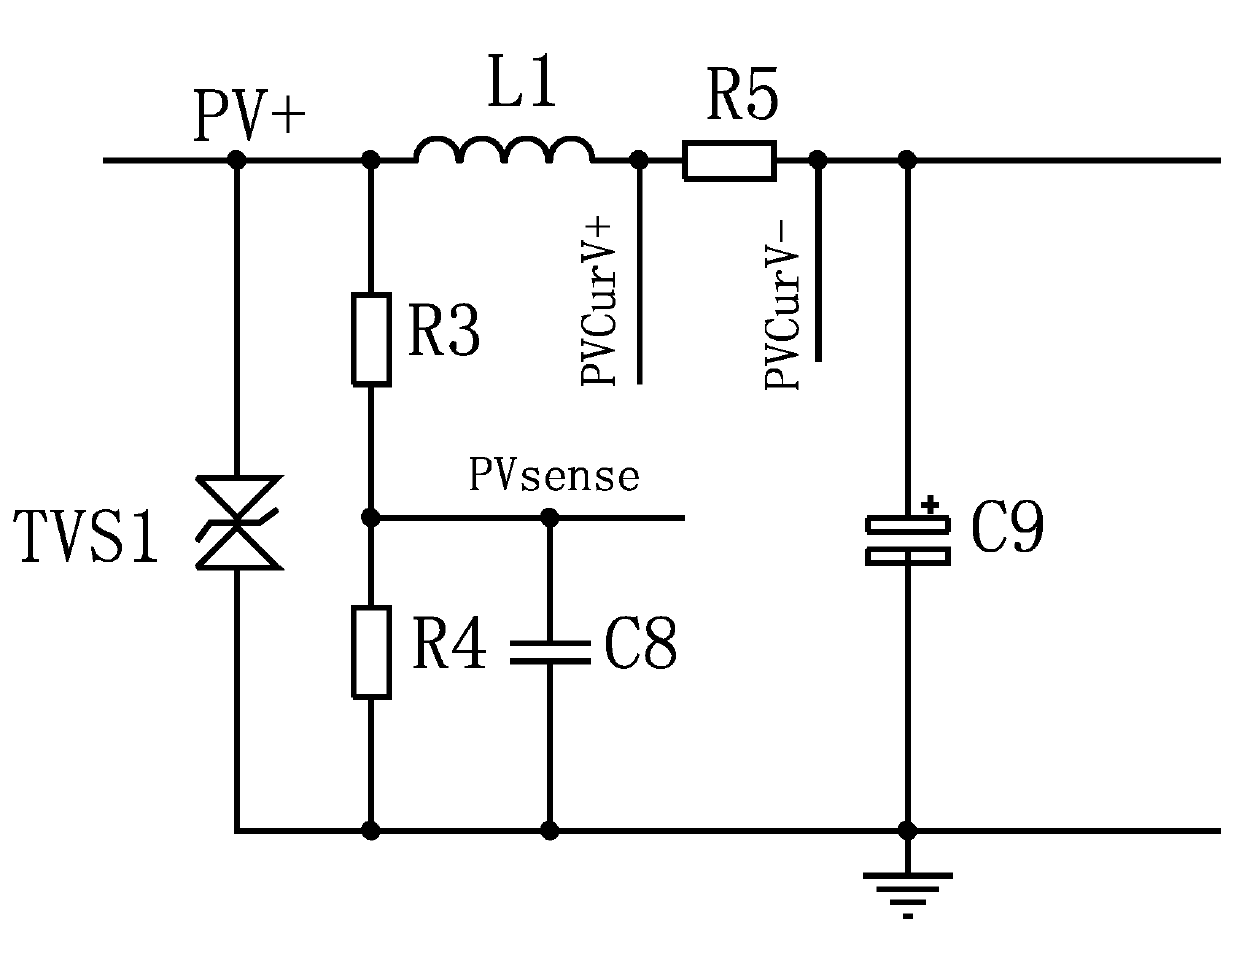 PSoC (Programmable System on Chip)-based MPPT (Maximum Power Point Tracking) type solar charge controller